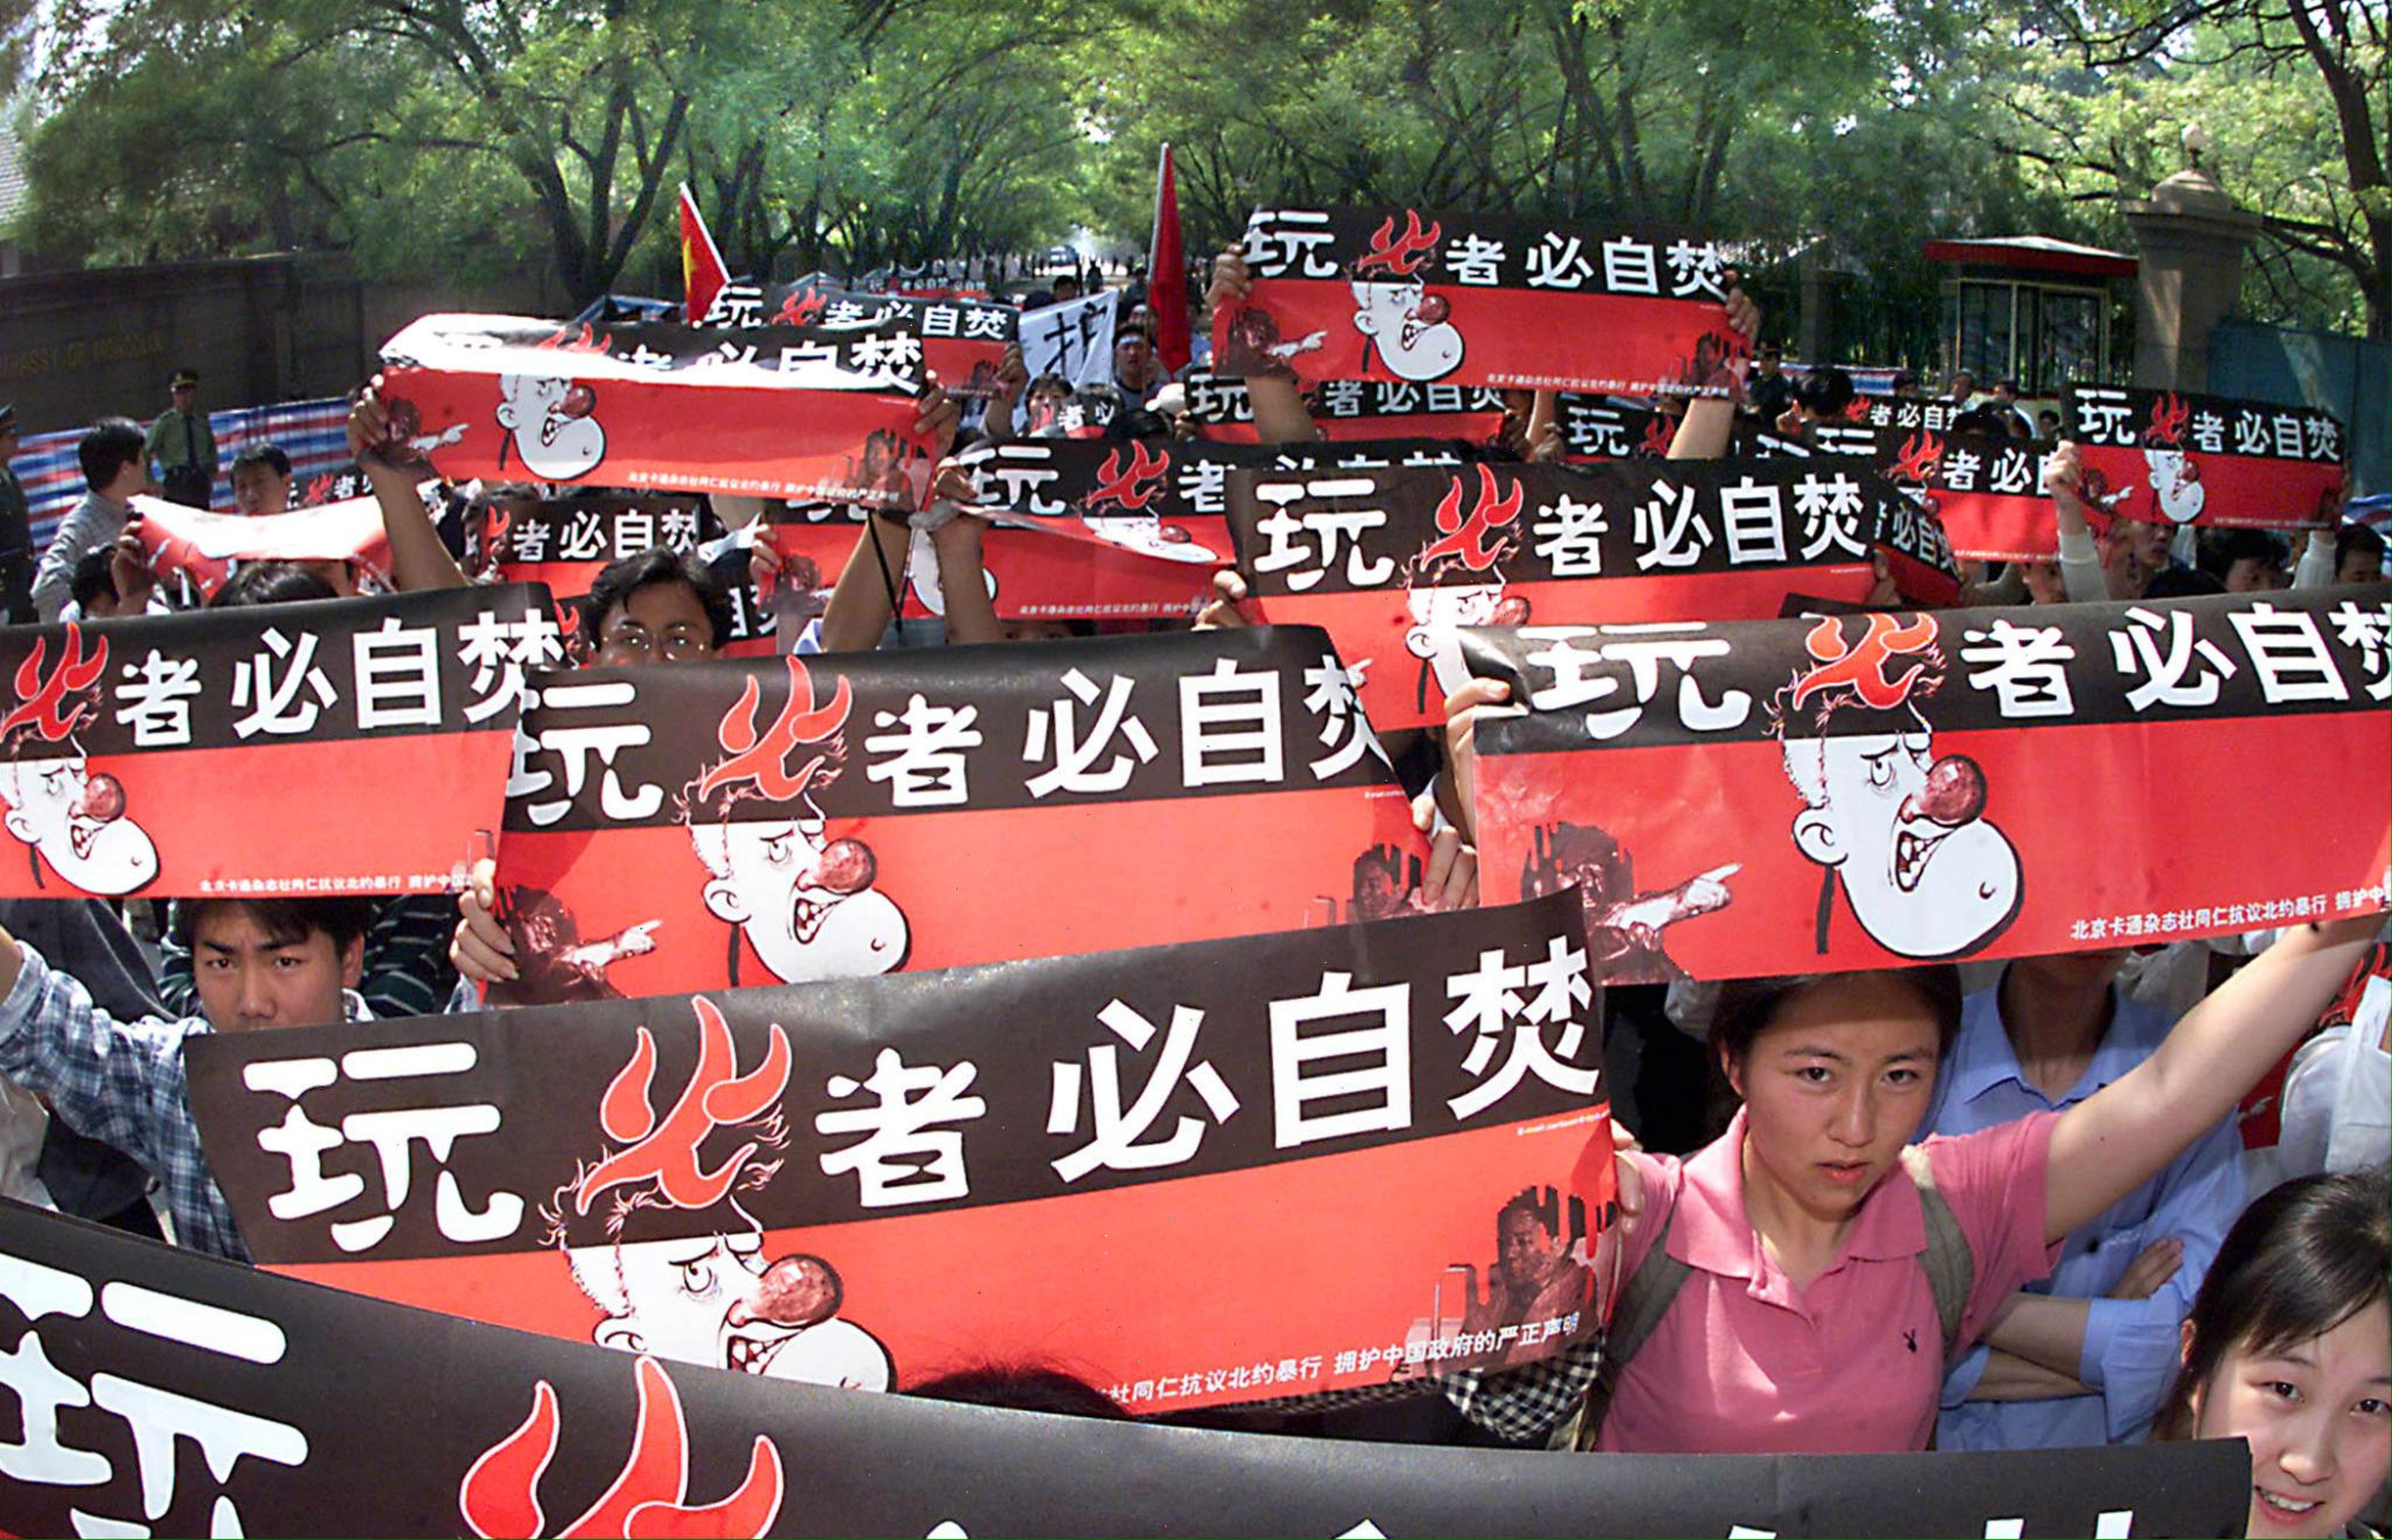 After the 1999 airstrike on the Chinese embassy as part of Nato’s campaign against the former Yugoslavia, protesters marched on the US embassy in Beijing, with banners warning then president Bill Clinton that “those who play with fire get burned”. Photo: AFP